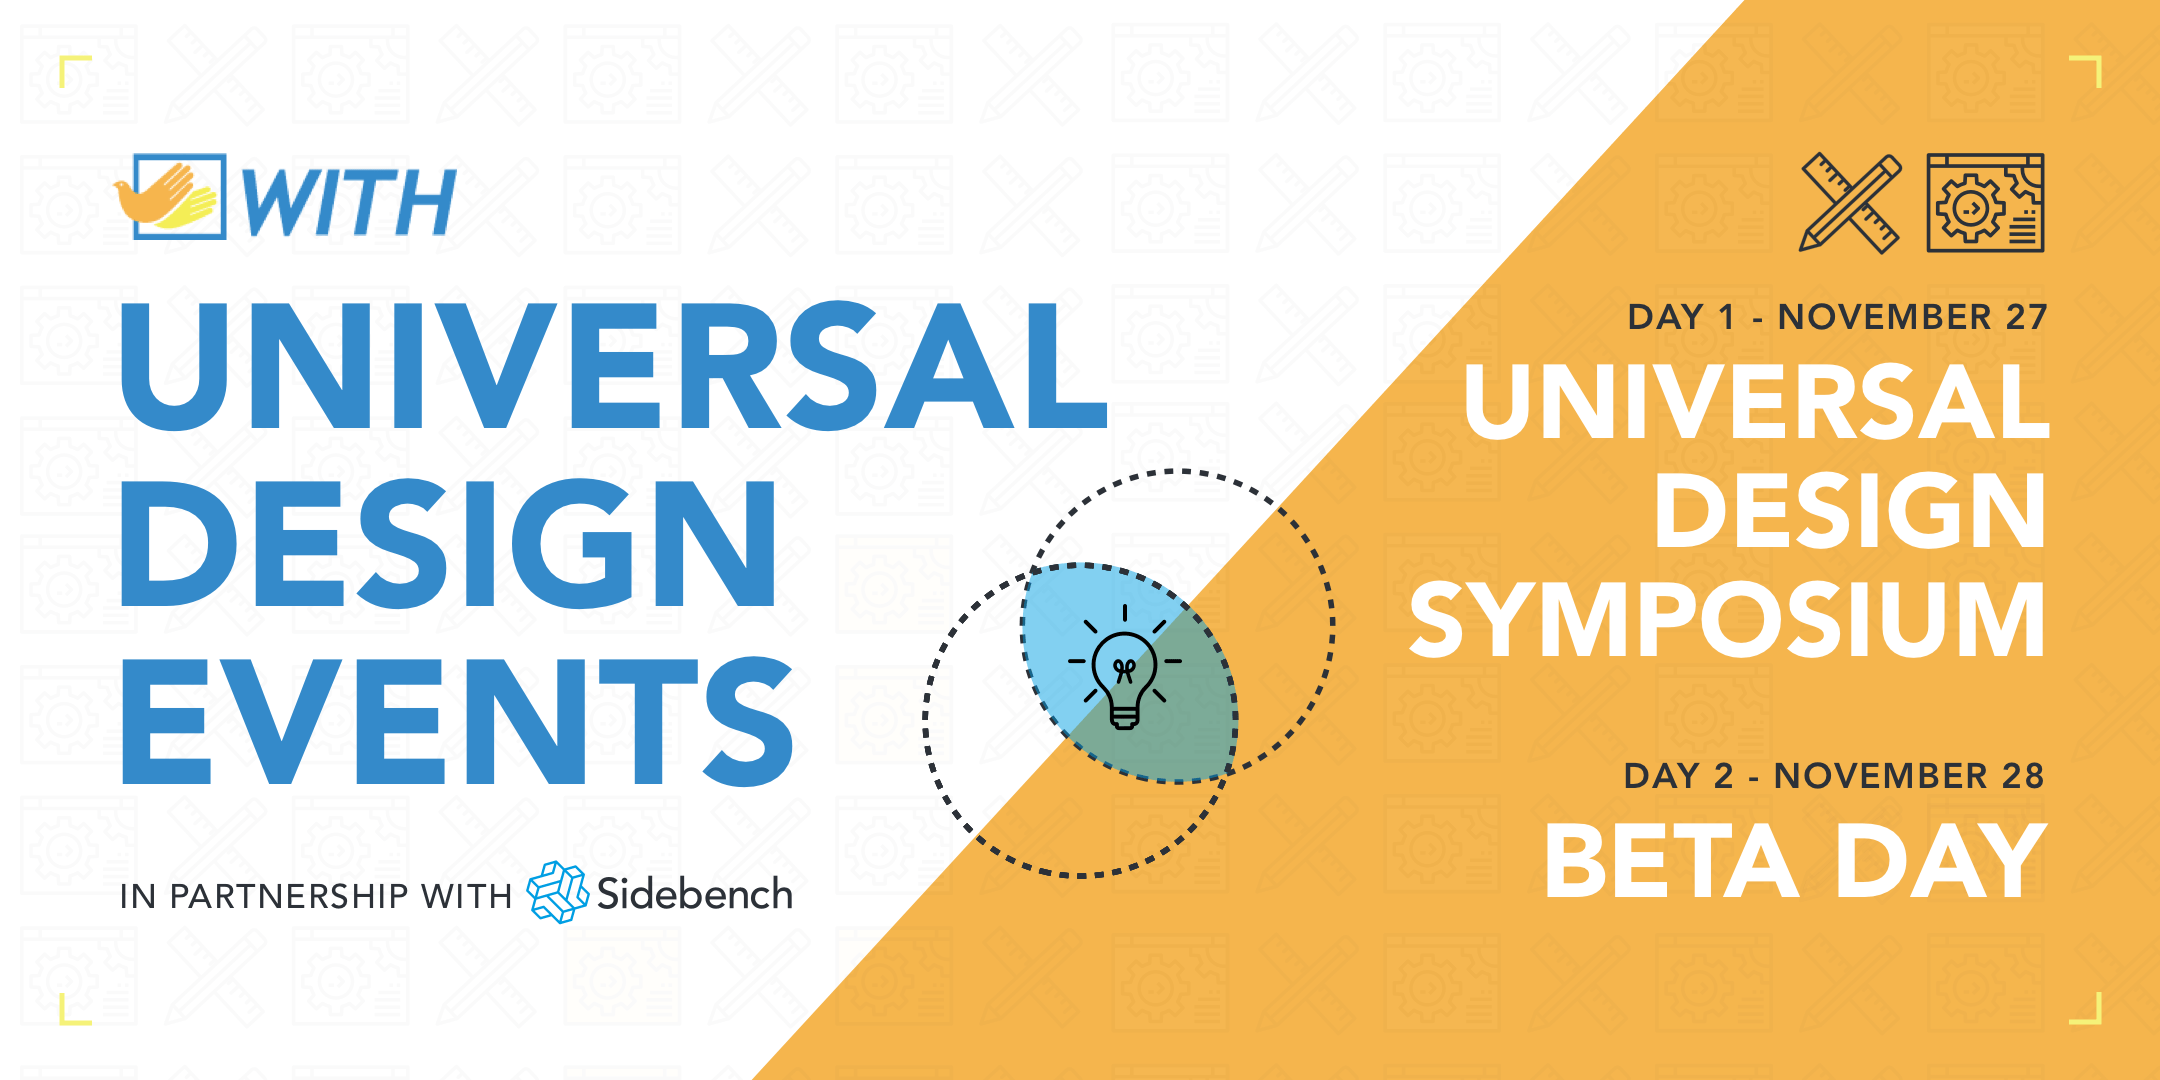 Universal design events WITH Foundation and Sidebench universal design symposium november 27 and tech product beta day november 28 